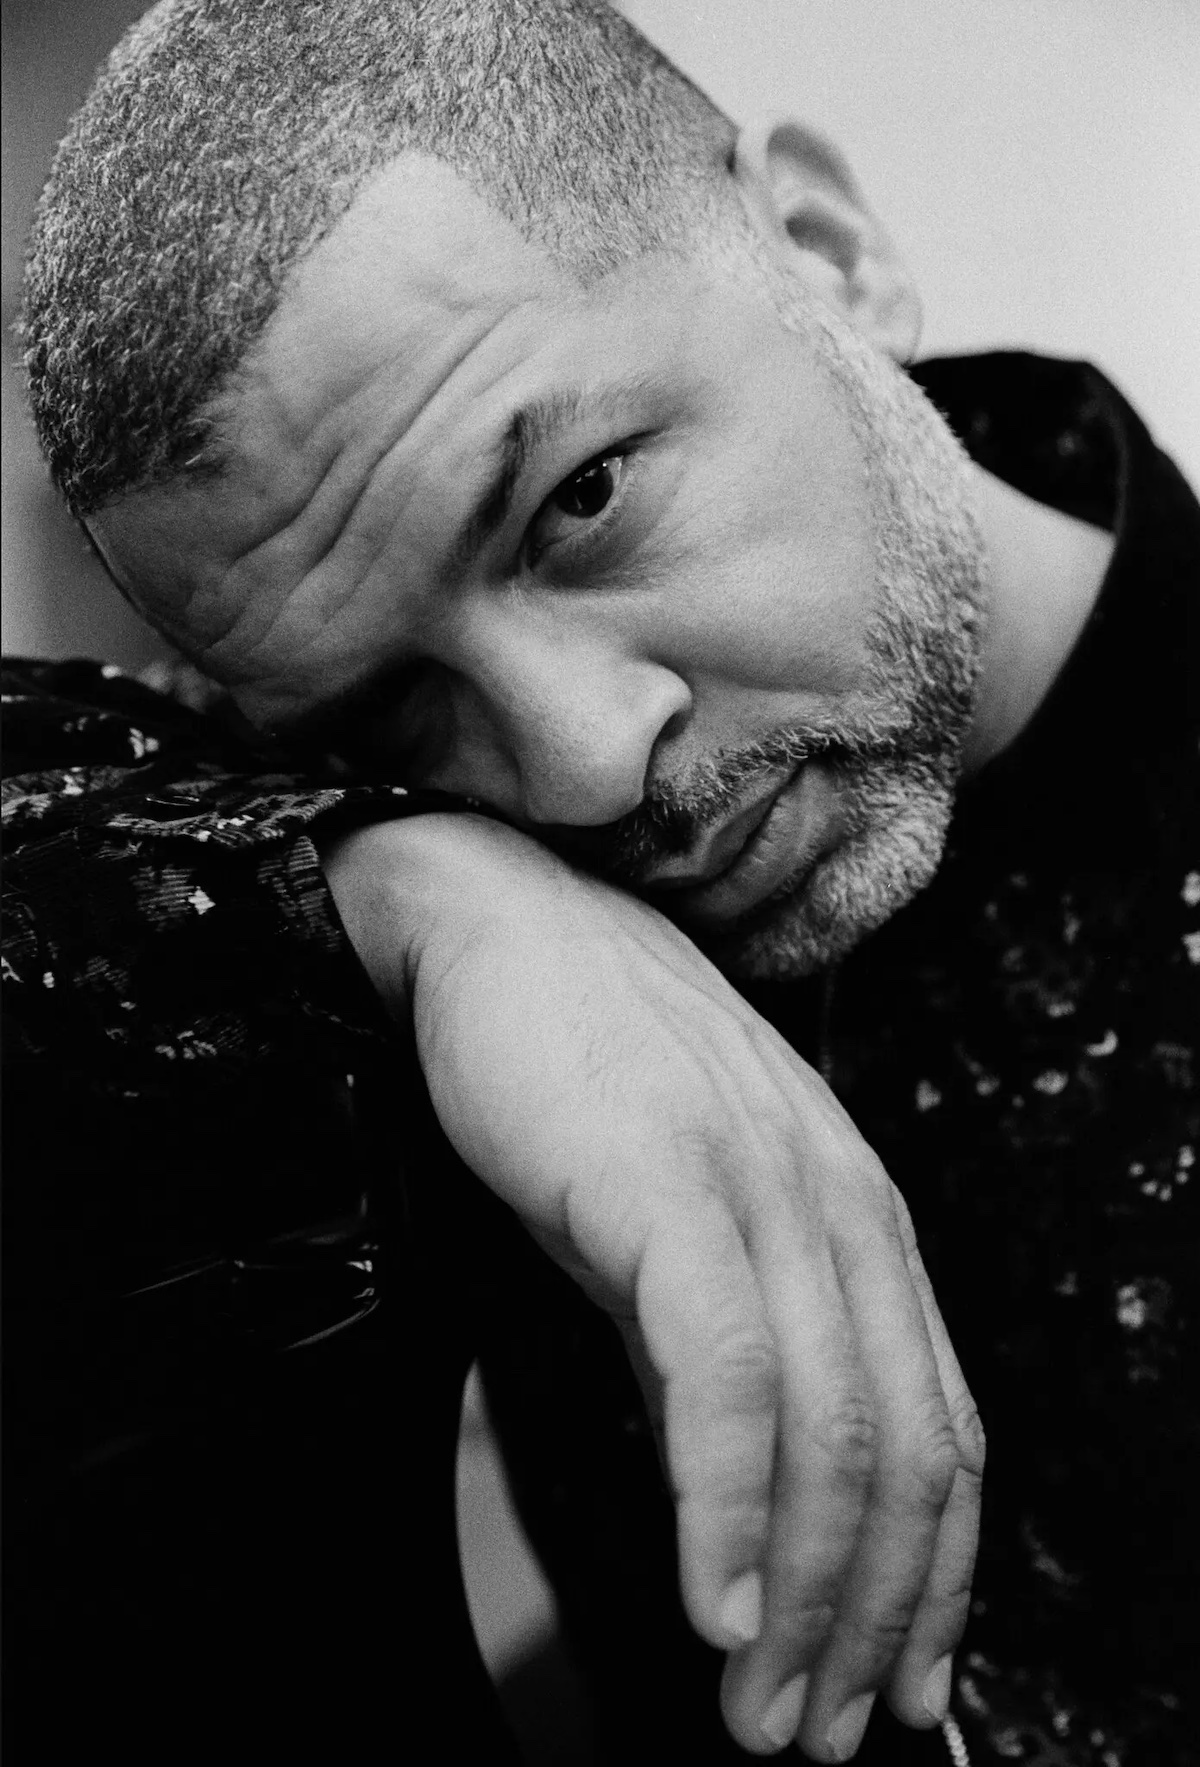 Jason Moran leaning his head on his wrist in a black and white photo.